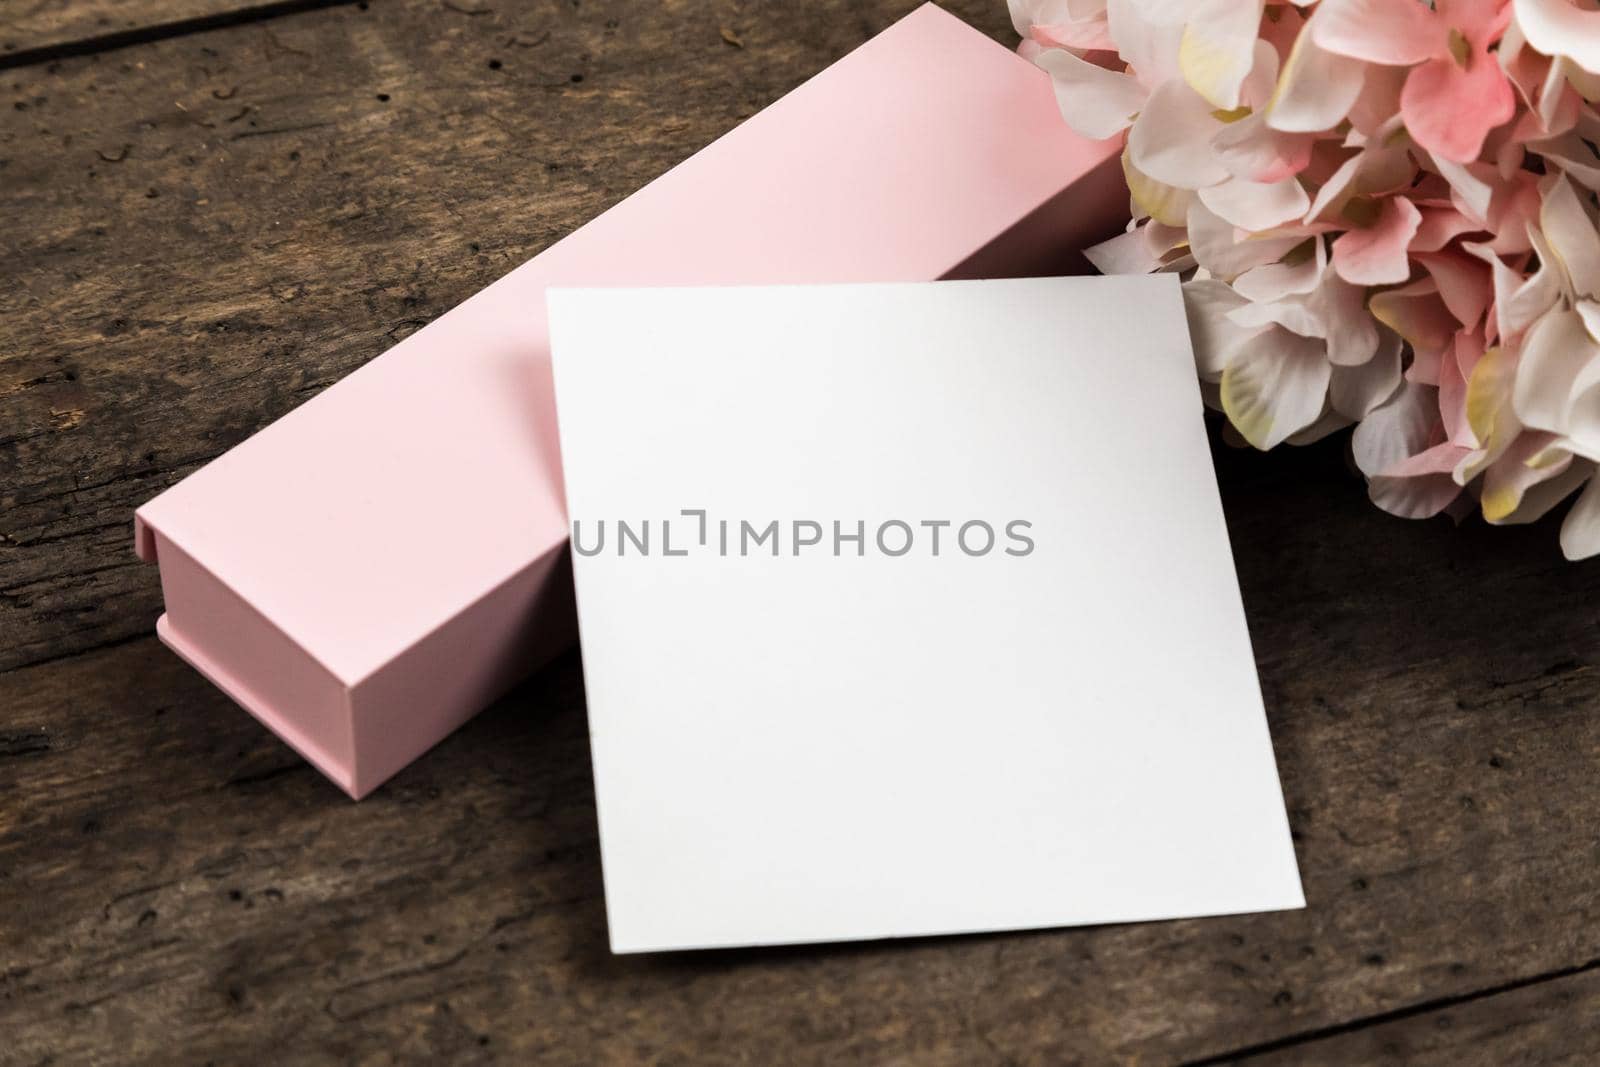 Pastel pink hydrangea flowers, gift box and a piece of paper on a wood background. Copy space for text.